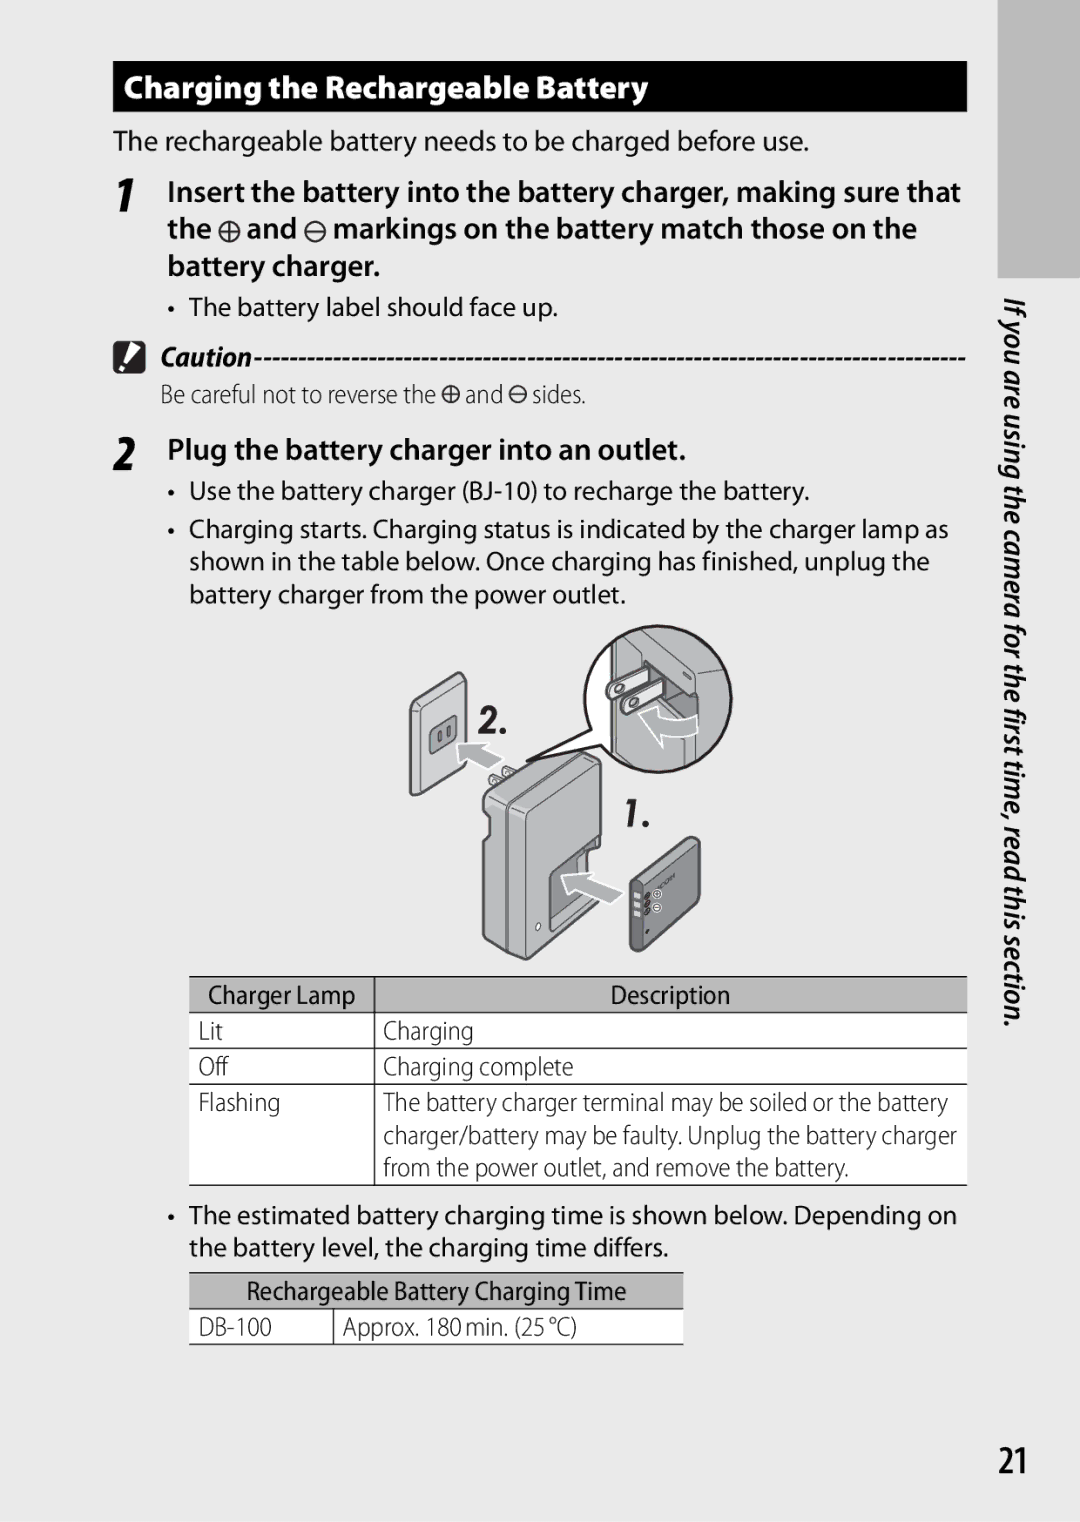 Ricoh CX3 manual Charging the Rechargeable Battery, Plug the battery charger into an outlet 